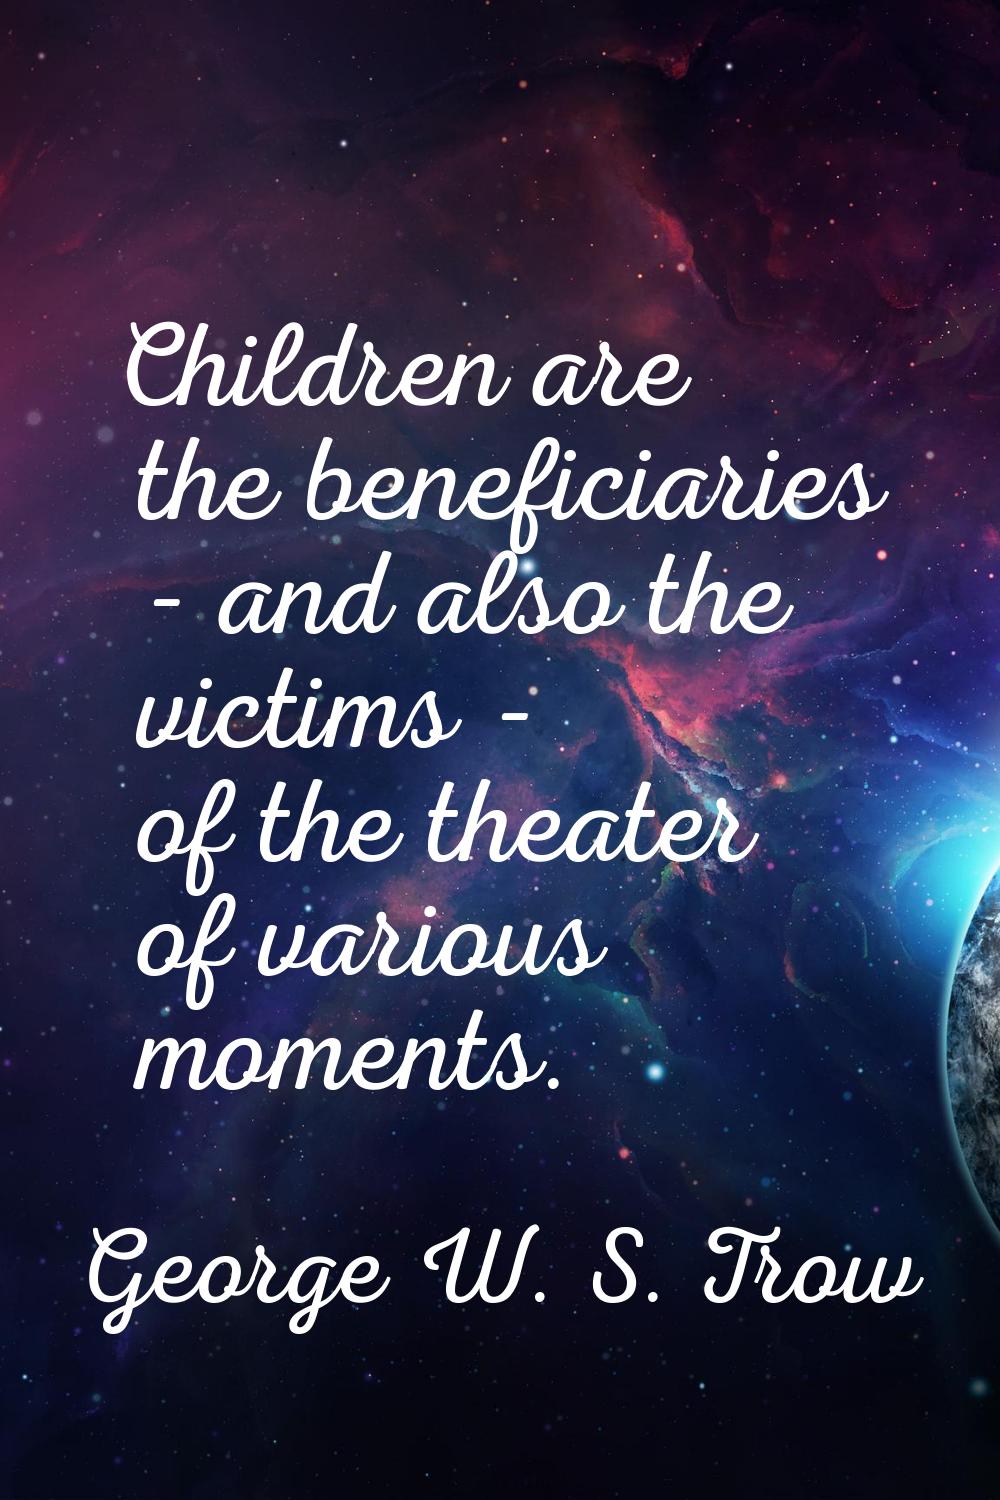 Children are the beneficiaries - and also the victims - of the theater of various moments.